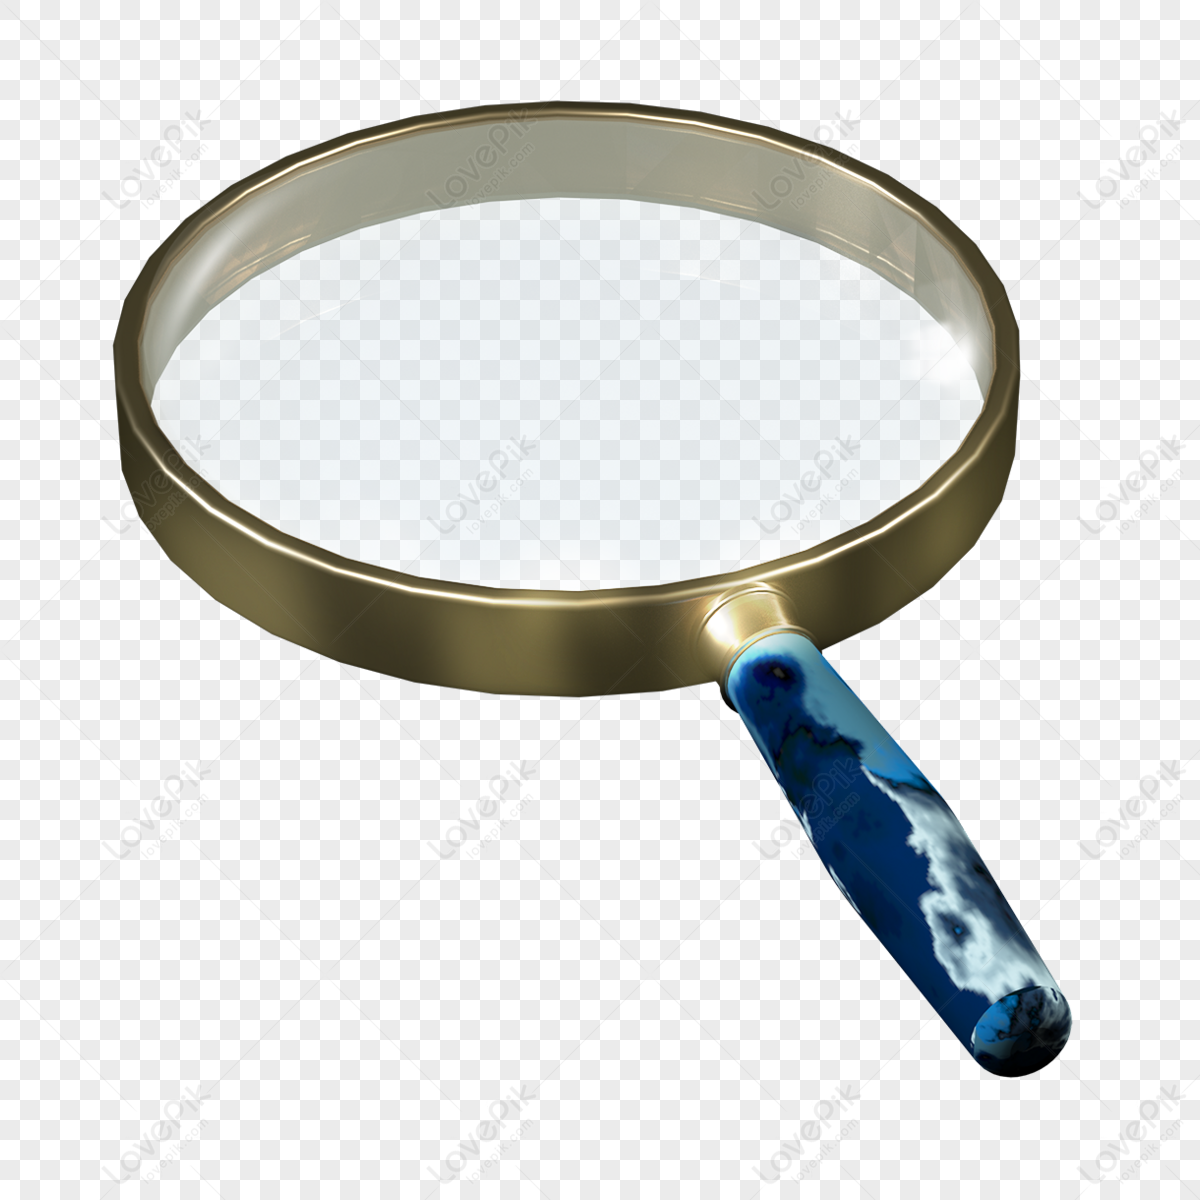 Loupe in hand PNG image transparent image download, size: 1312x3508px